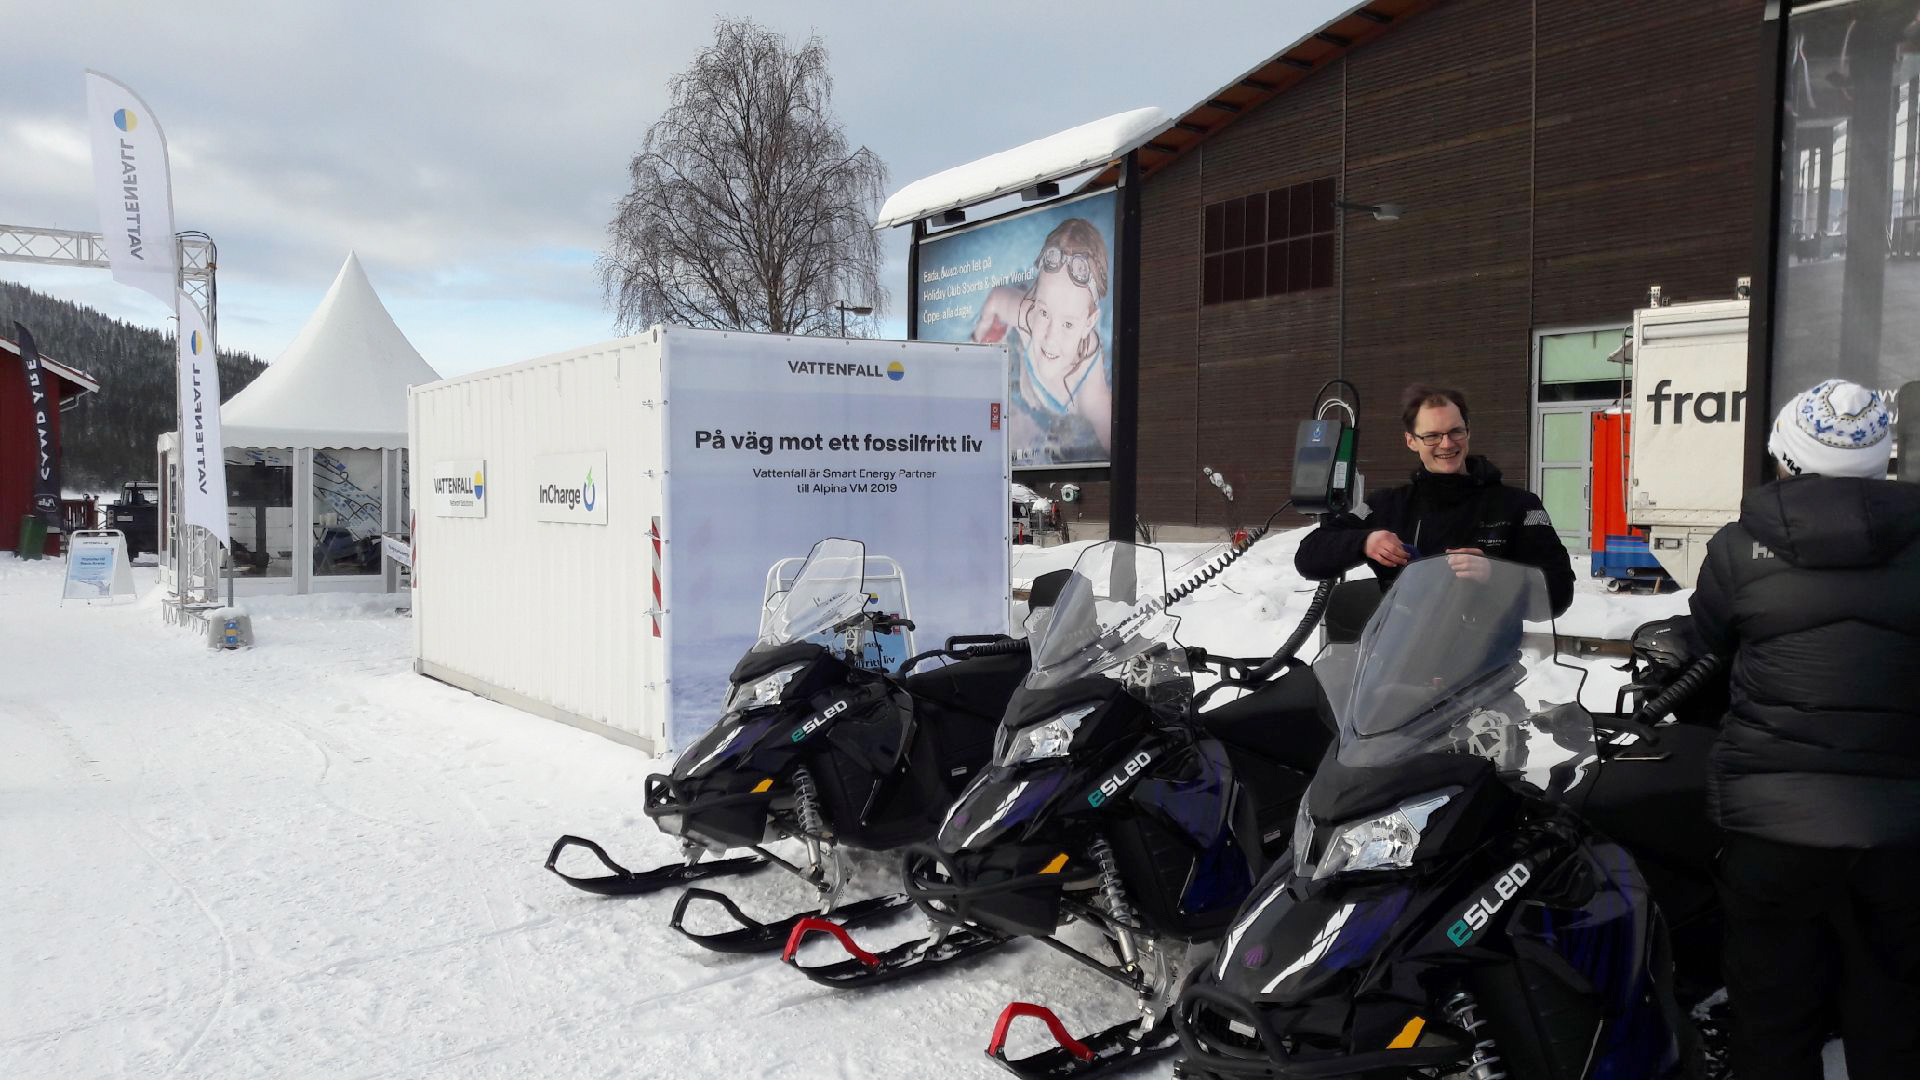 During the FIS Alpine World Ski Championships in Åre, Sweden, the mega battery will charge vehicles and electrical snowmobiles.